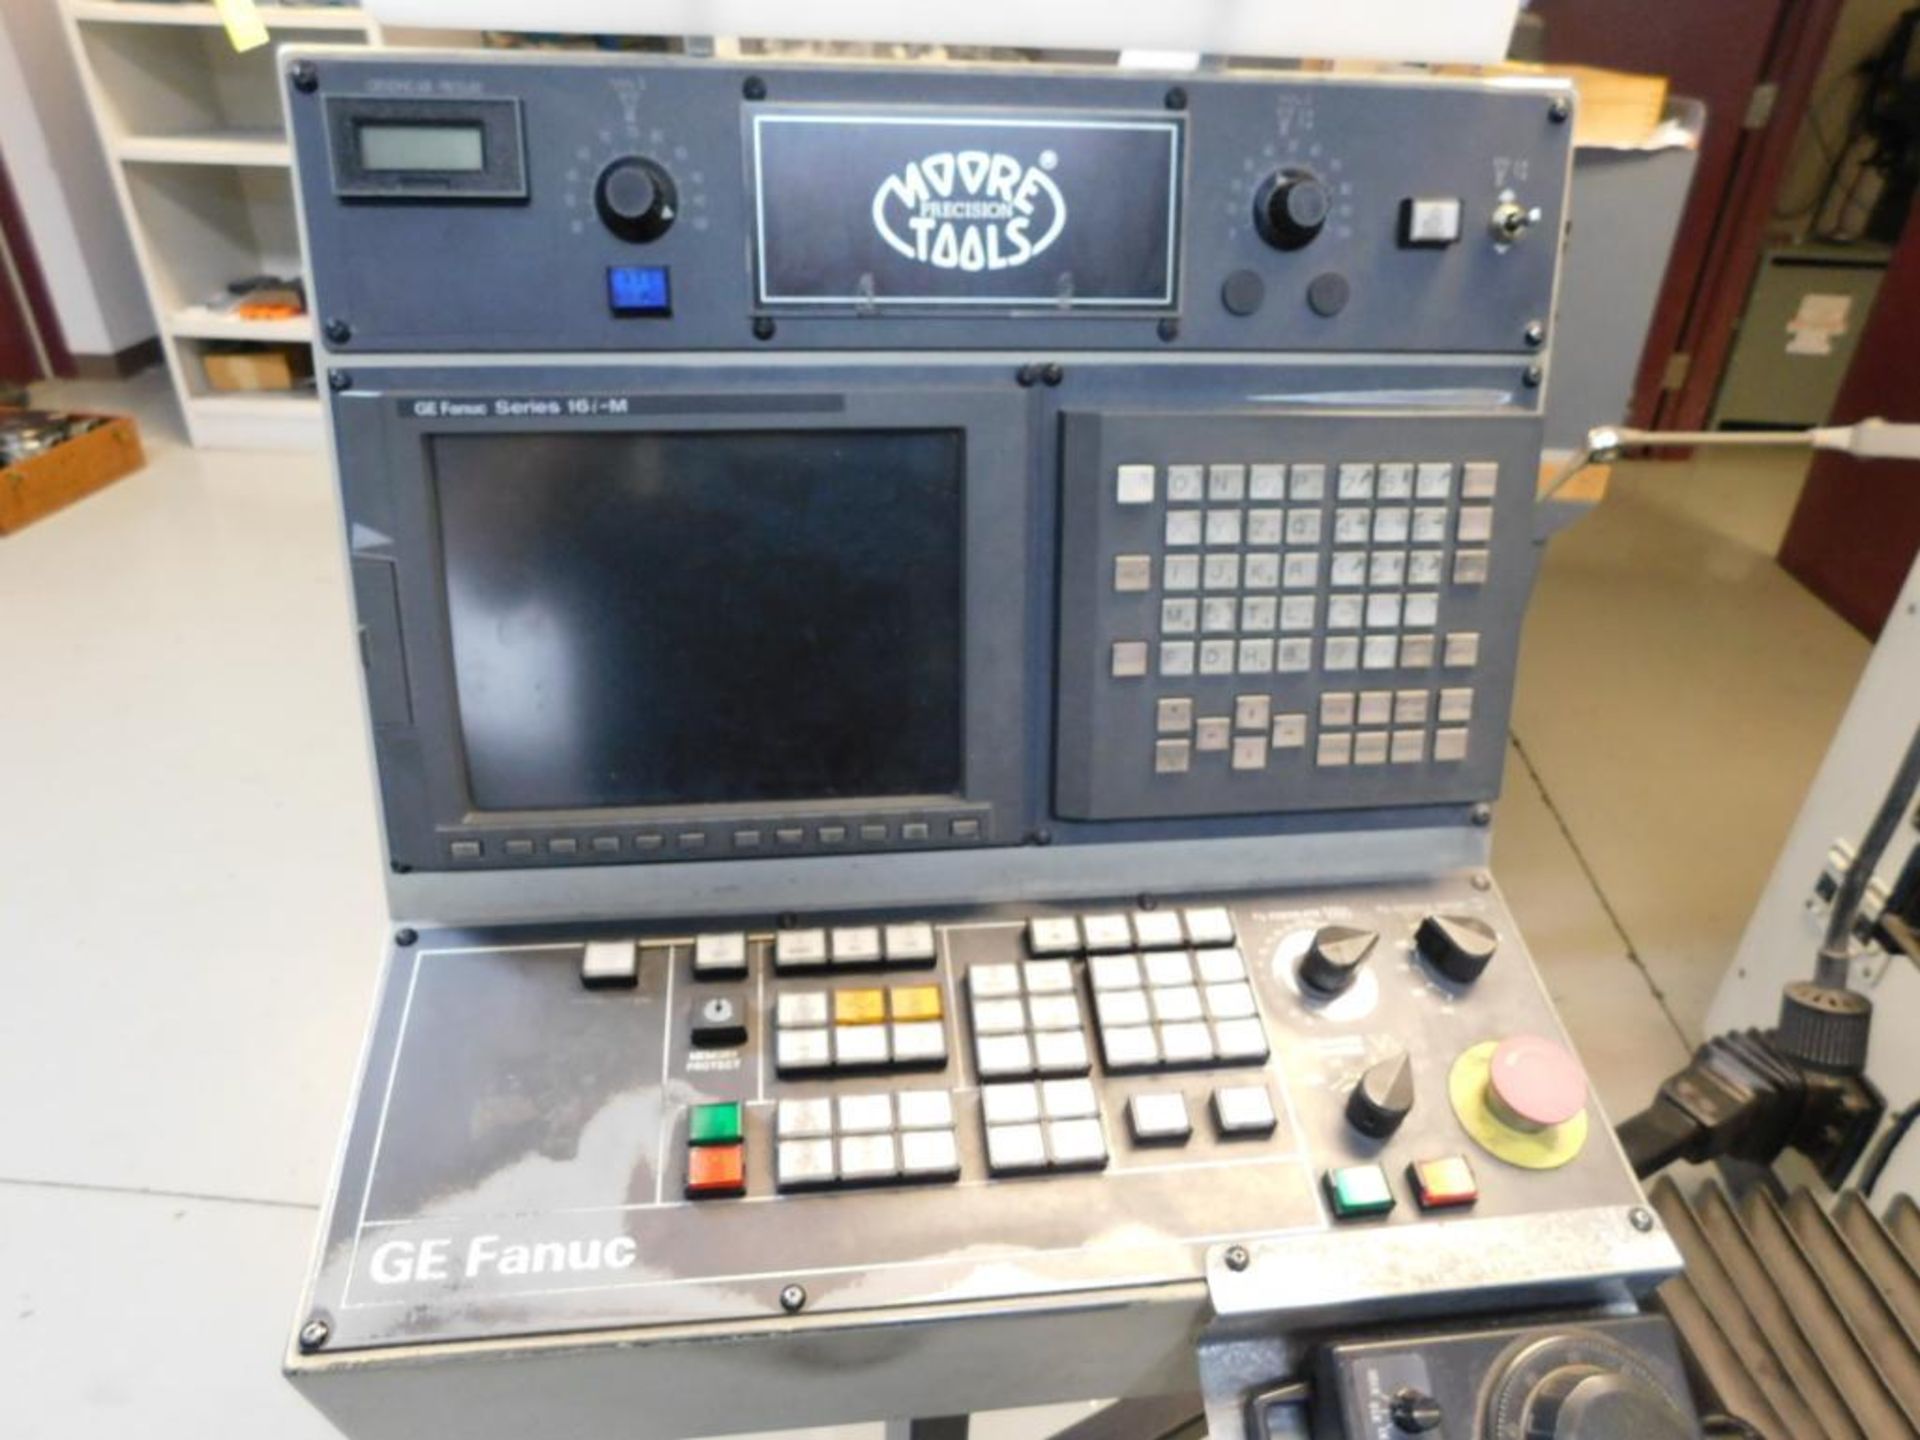 Moore CNC Jig Grinder, Model 450 CPR, S/N G1737(1998), 11 in. x 24 in. Work Table, GE Fanuc 16i-M Co - Image 4 of 4